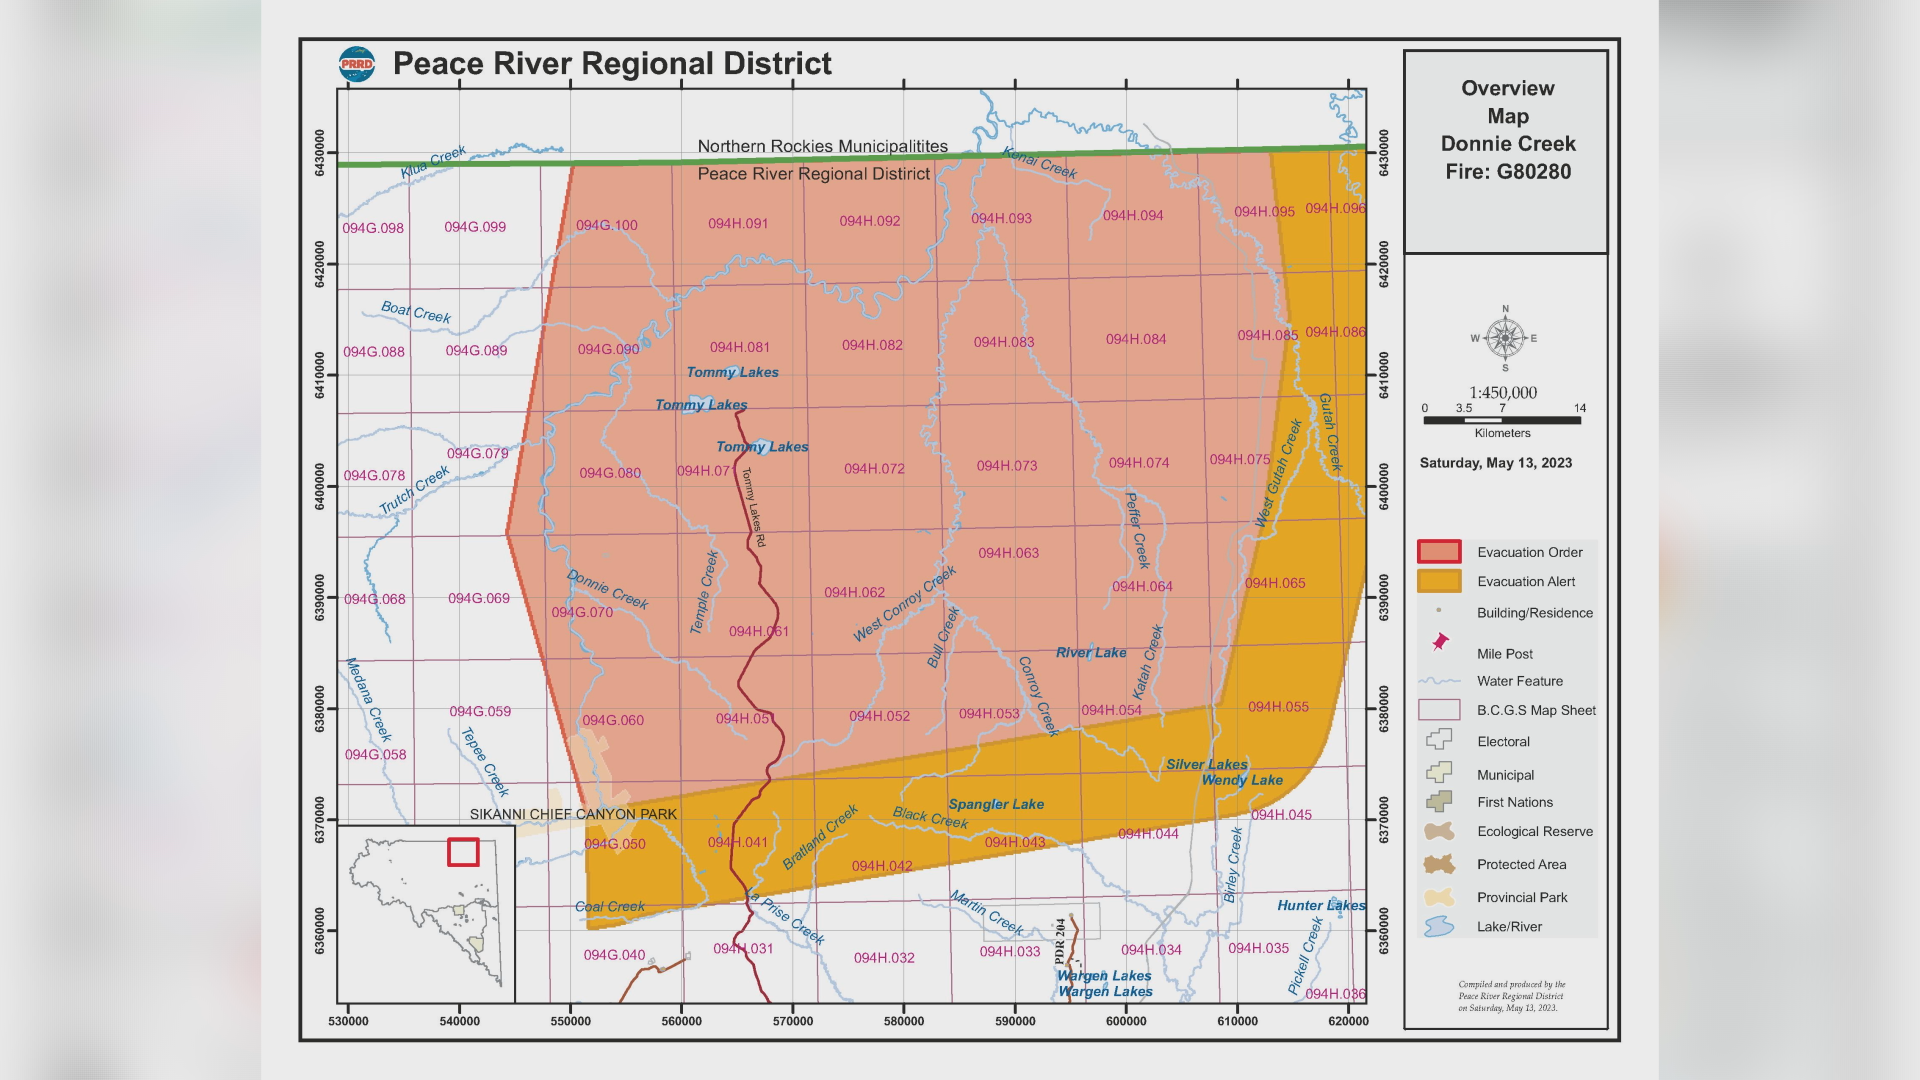 A map shows the area covered by an evacuation order issued by the Peace River Regional District May 13, 2023